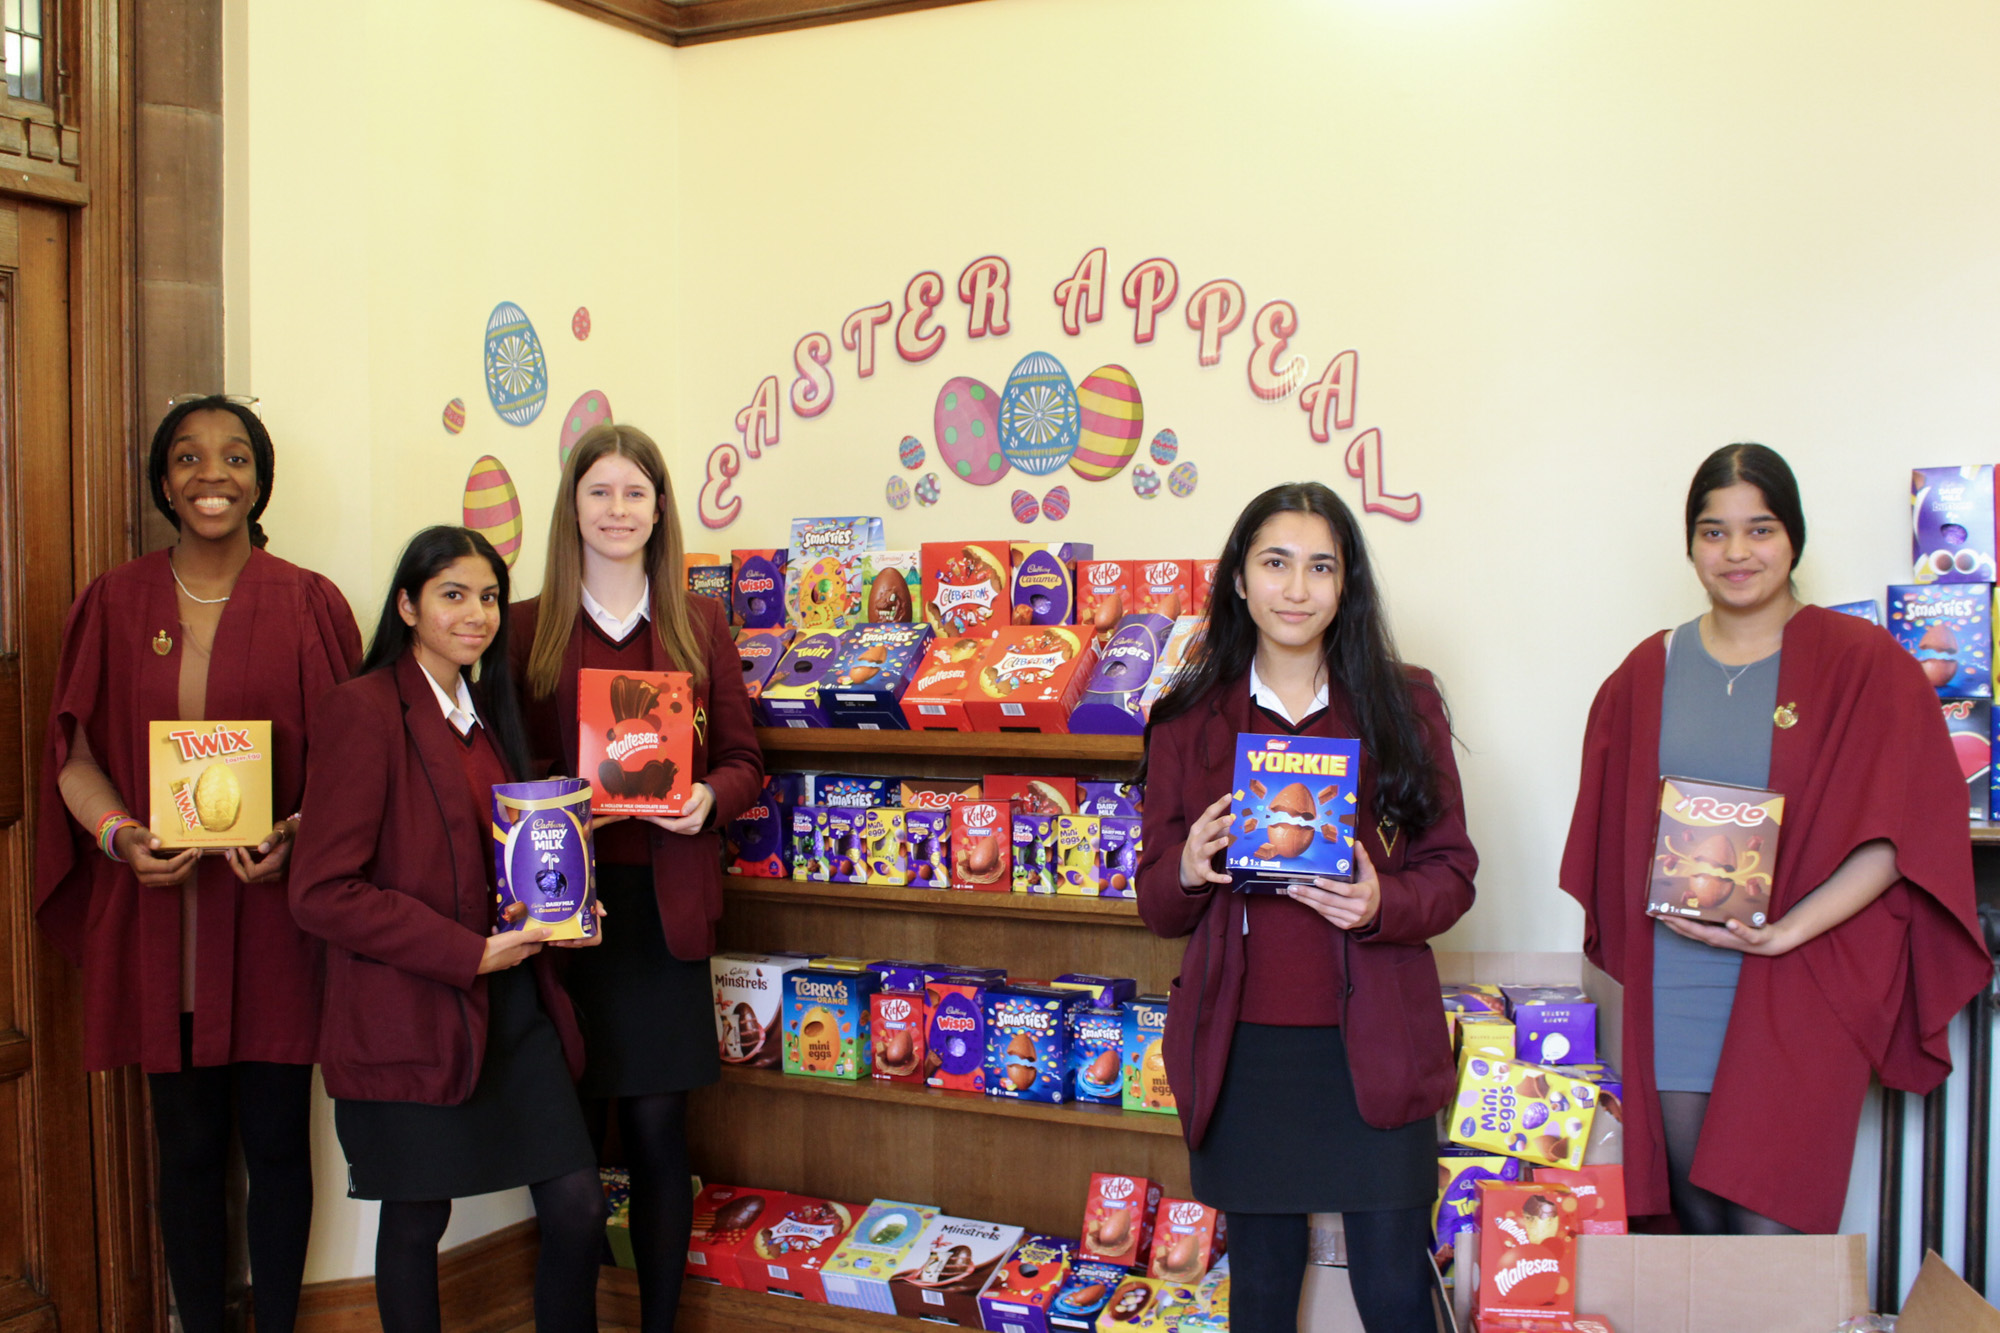 5 Bolton School Girls' Division pupils standing in front of a large and full 'Easter Appeal' display of Easter eggs, featuring a colourful array of boxed chocolate eggs.